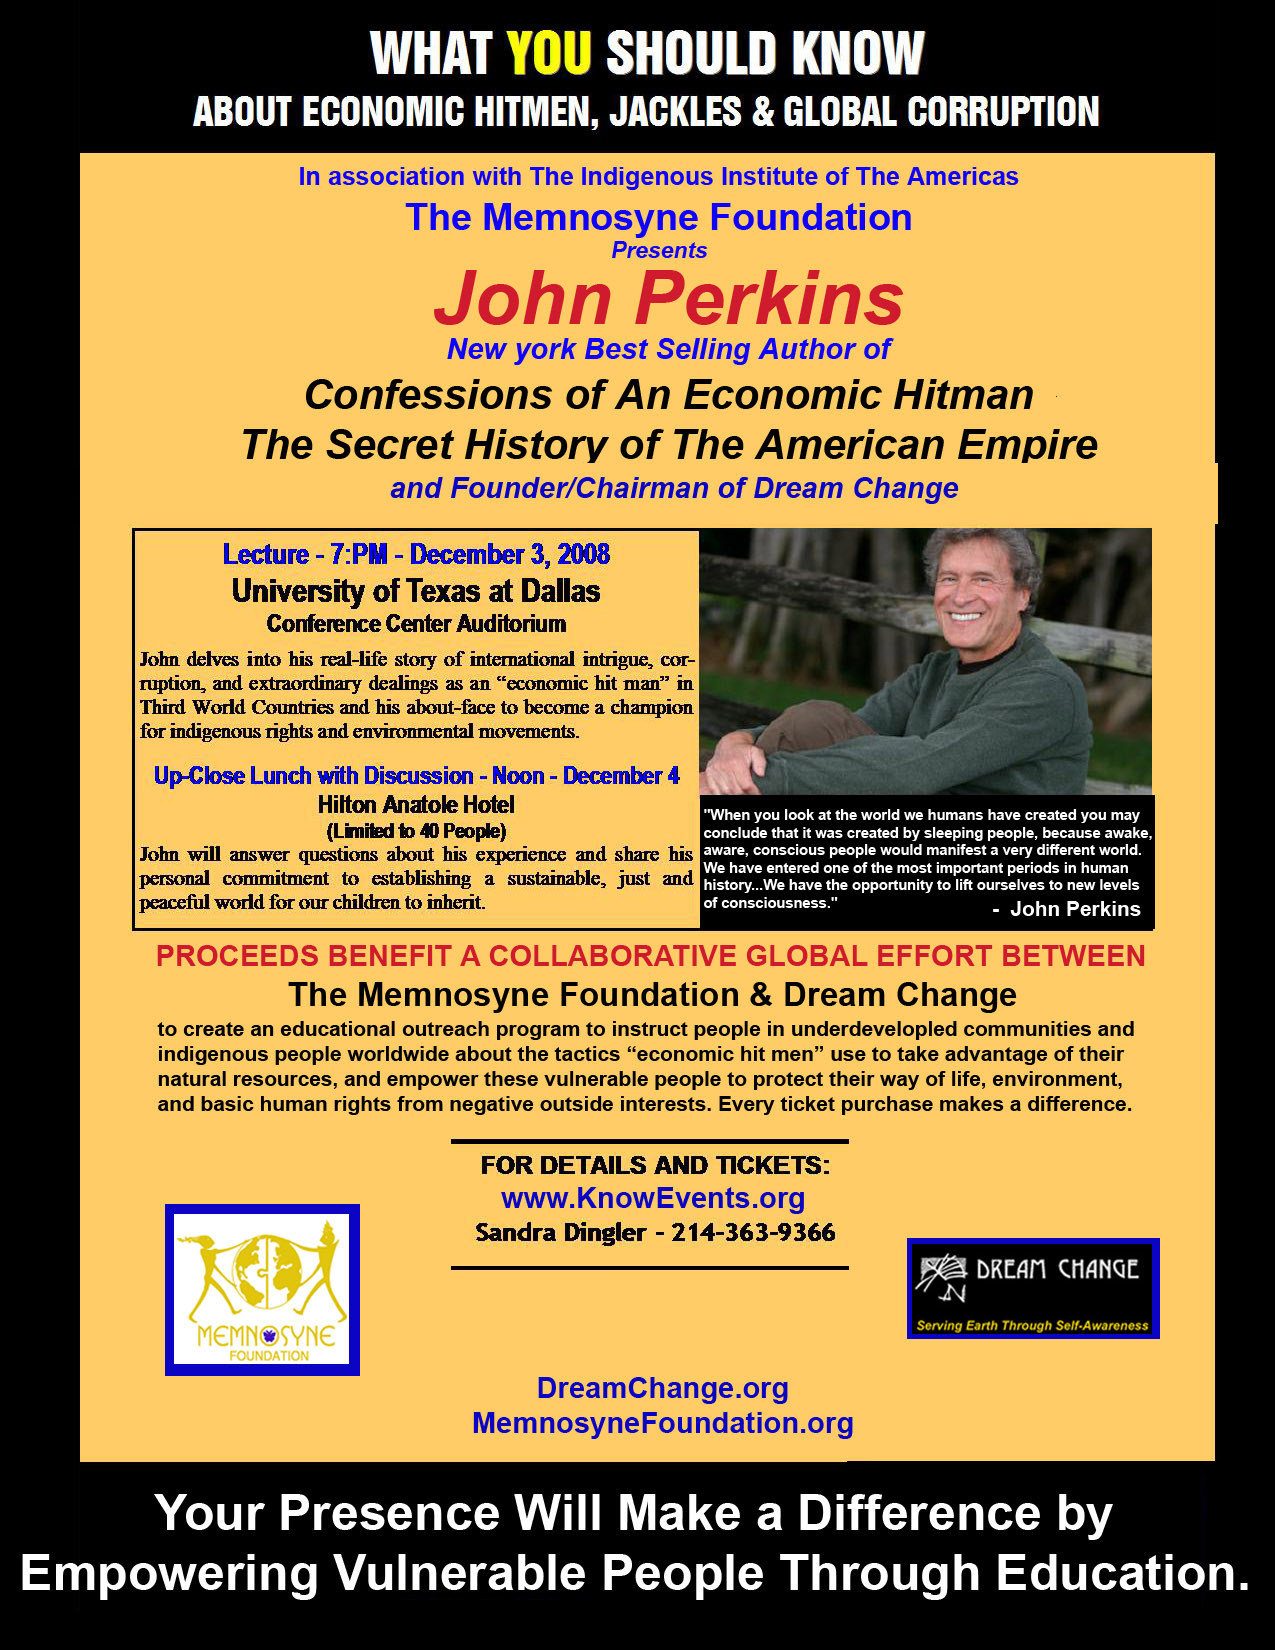 Click here to make a difference by purchasing your ticket! The Proceeds from all tickets sold for NY Bestselling Author,John Perkins, will go to benefit a collaborative global effort between The Memnosyne Foundation and his non-profit, Dream Change, in order to create an educational outreach program to instruct people in underdevelopled communities andindigenous people worldwide about the tactics “economic hit men” use to take advantage of theirnatural resources, and empower these vulnerable people to protect their way of life, environment,and basic human rights from negative outside interests.